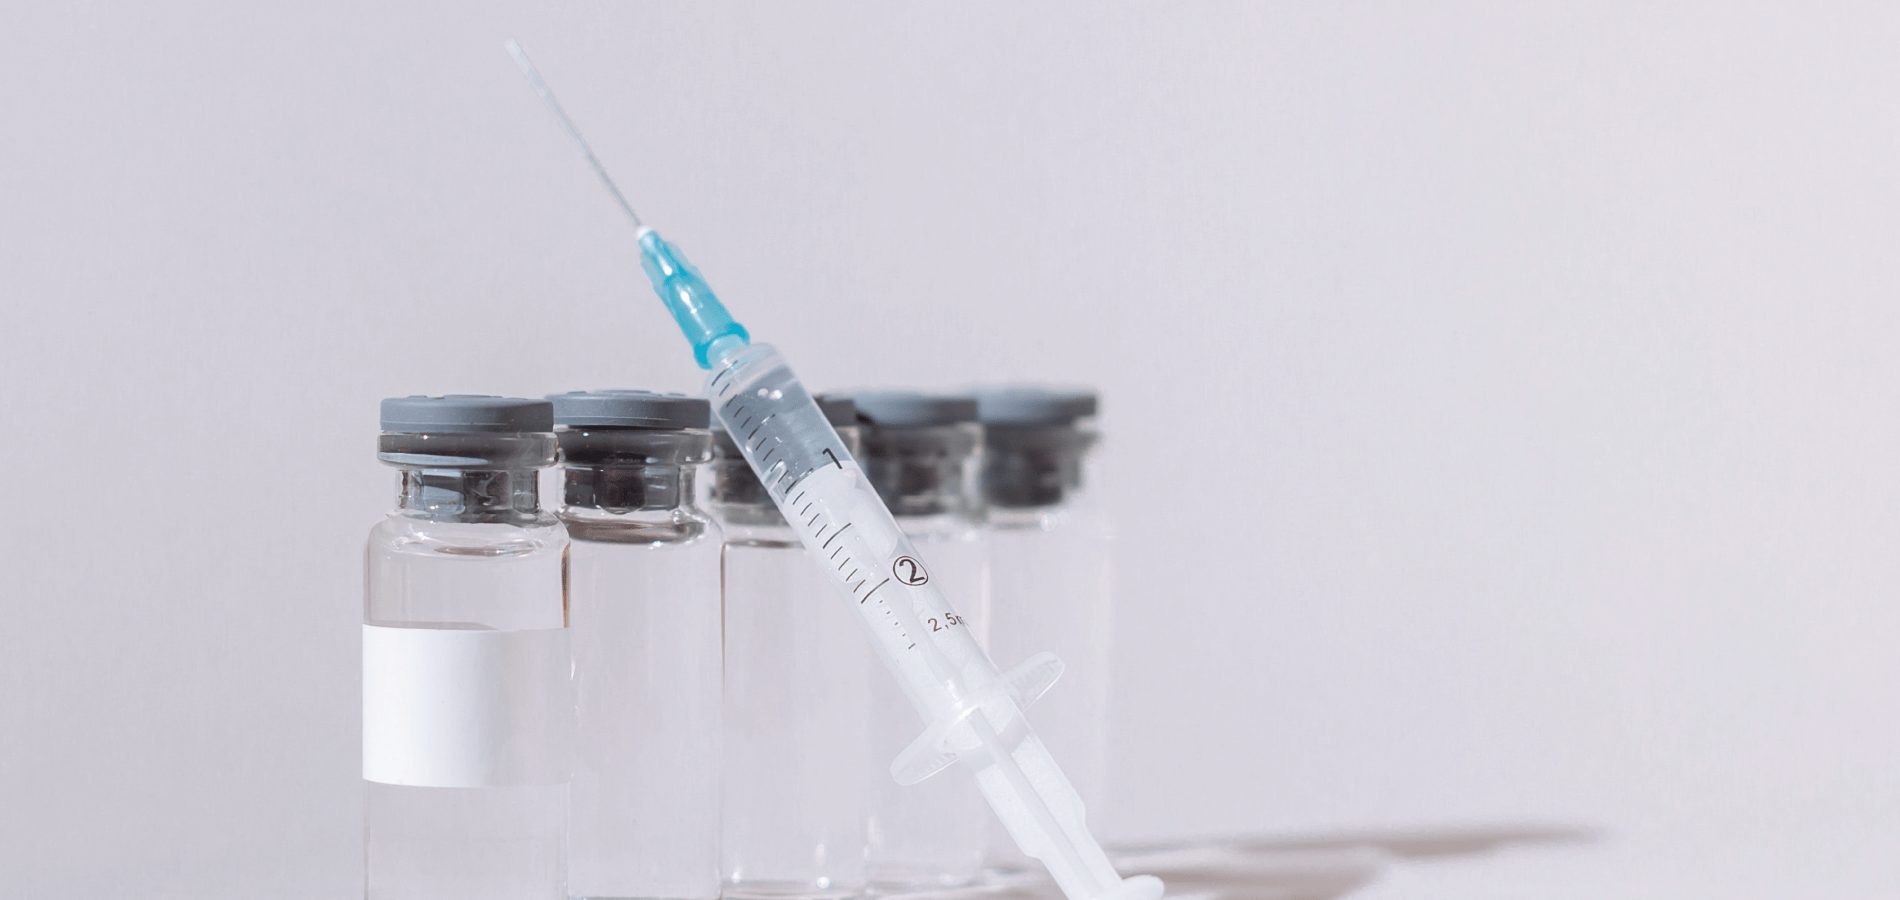 image of vaccine vials and needle